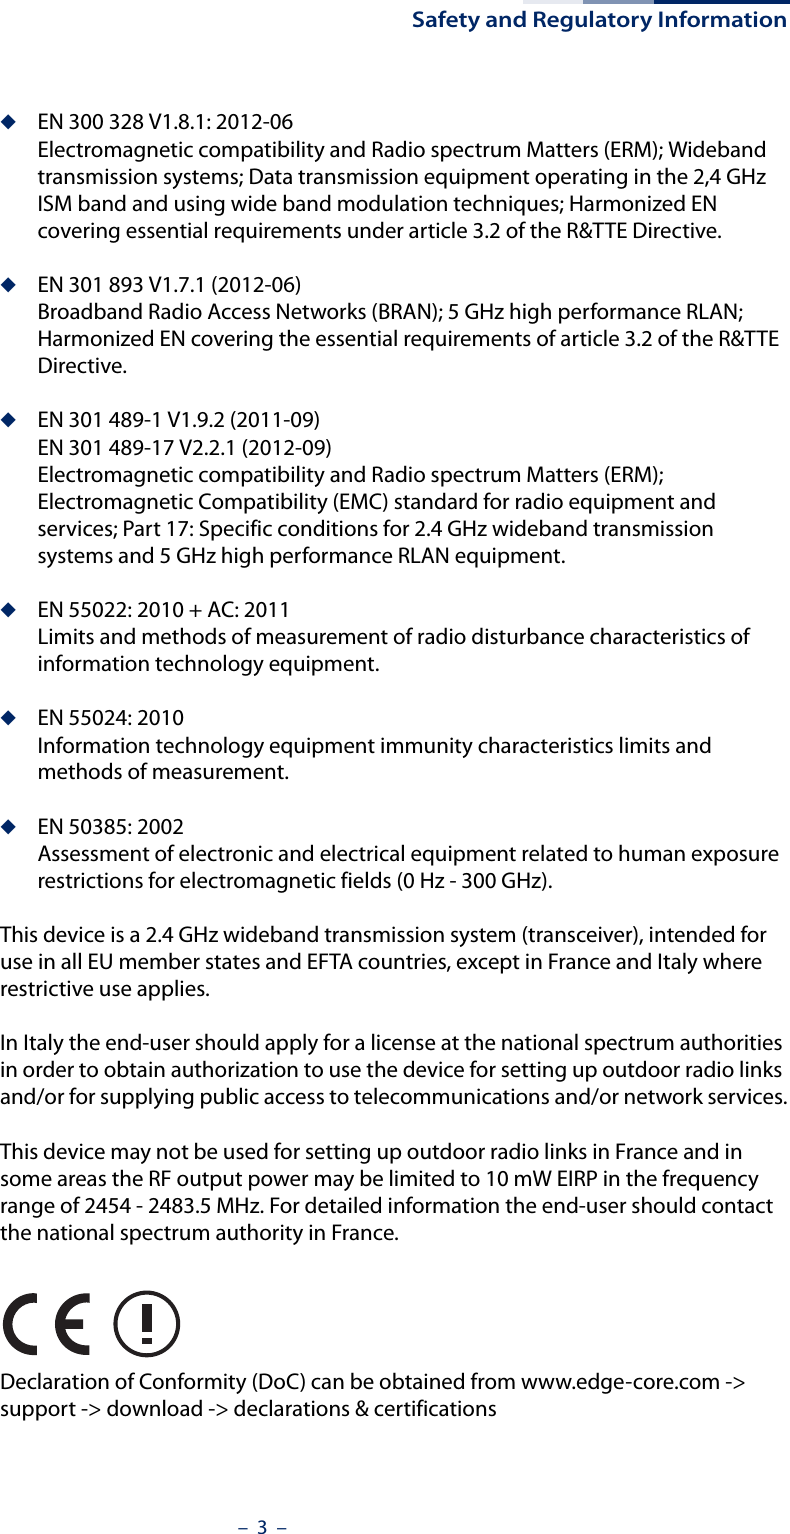 Safety and Regulatory Information–  3  –◆EN 300 328 V1.8.1: 2012-06Electromagnetic compatibility and Radio spectrum Matters (ERM); Wideband transmission systems; Data transmission equipment operating in the 2,4 GHz ISM band and using wide band modulation techniques; Harmonized EN covering essential requirements under article 3.2 of the R&amp;TTE Directive.◆EN 301 893 V1.7.1 (2012-06)Broadband Radio Access Networks (BRAN); 5 GHz high performance RLAN; Harmonized EN covering the essential requirements of article 3.2 of the R&amp;TTE Directive.◆EN 301 489-1 V1.9.2 (2011-09)EN 301 489-17 V2.2.1 (2012-09)Electromagnetic compatibility and Radio spectrum Matters (ERM); Electromagnetic Compatibility (EMC) standard for radio equipment and services; Part 17: Specific conditions for 2.4 GHz wideband transmission systems and 5 GHz high performance RLAN equipment.◆EN 55022: 2010 + AC: 2011Limits and methods of measurement of radio disturbance characteristics of information technology equipment.◆EN 55024: 2010Information technology equipment immunity characteristics limits and methods of measurement.◆EN 50385: 2002Assessment of electronic and electrical equipment related to human exposure restrictions for electromagnetic fields (0 Hz - 300 GHz).This device is a 2.4 GHz wideband transmission system (transceiver), intended for use in all EU member states and EFTA countries, except in France and Italy where restrictive use applies.In Italy the end-user should apply for a license at the national spectrum authorities in order to obtain authorization to use the device for setting up outdoor radio links and/or for supplying public access to telecommunications and/or network services.This device may not be used for setting up outdoor radio links in France and in some areas the RF output power may be limited to 10 mW EIRP in the frequency range of 2454 - 2483.5 MHz. For detailed information the end-user should contact the national spectrum authority in France.Declaration of Conformity (DoC) can be obtained from www.edge-core.com -&gt; support -&gt; download -&gt; declarations &amp; certifications